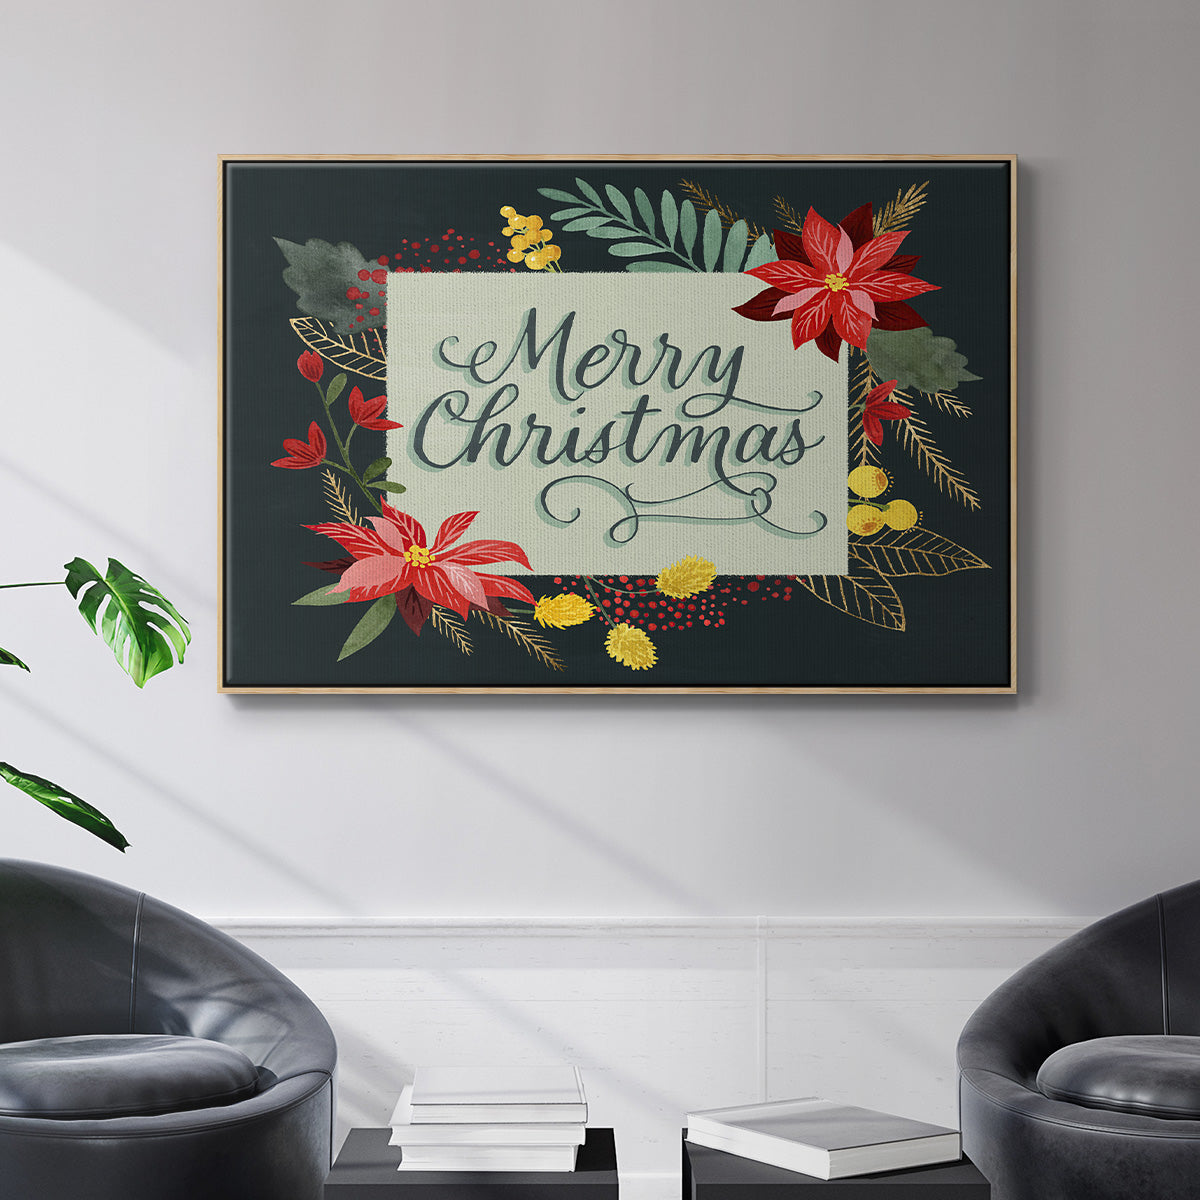 Bright Christmas Night  I - Framed Gallery Wrapped Canvas in Floating Frame